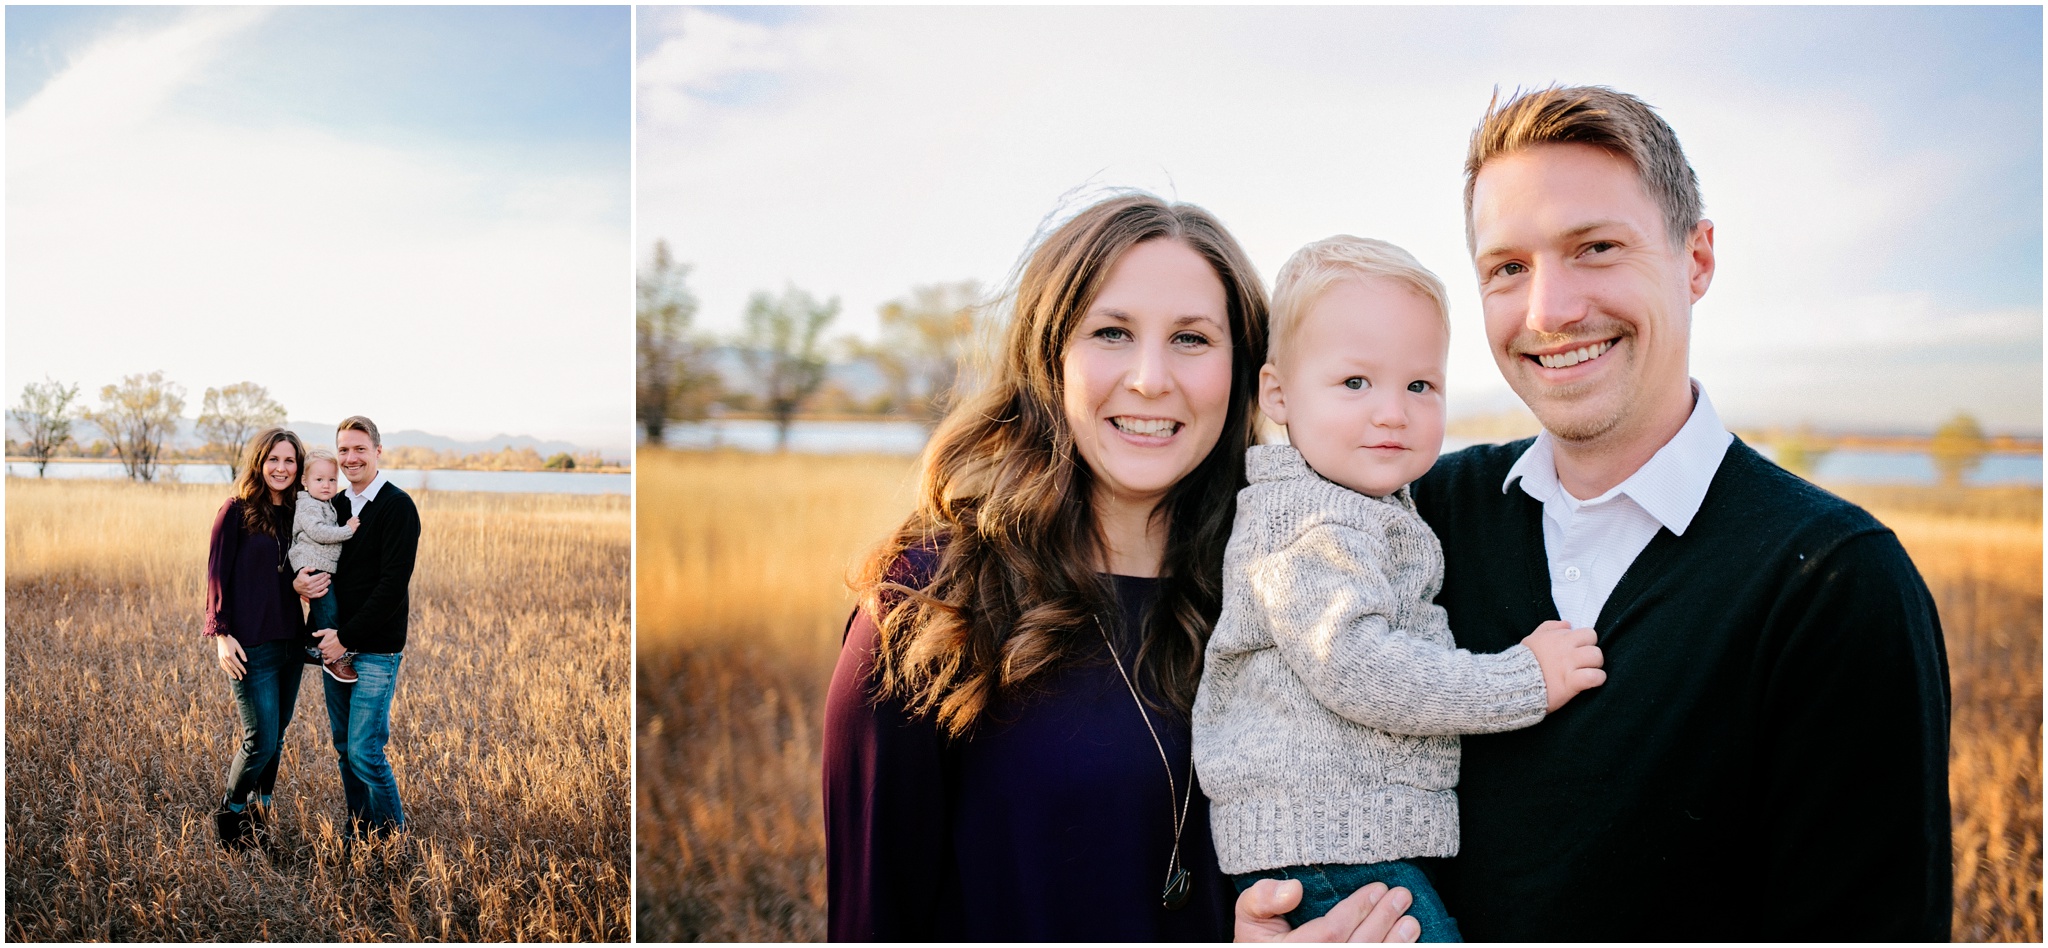 denver, colorado, family , wedding, photographer, photography, love, rustic, film, modern, whimsical, love, family, photos, lakewood, crown hill lake, park